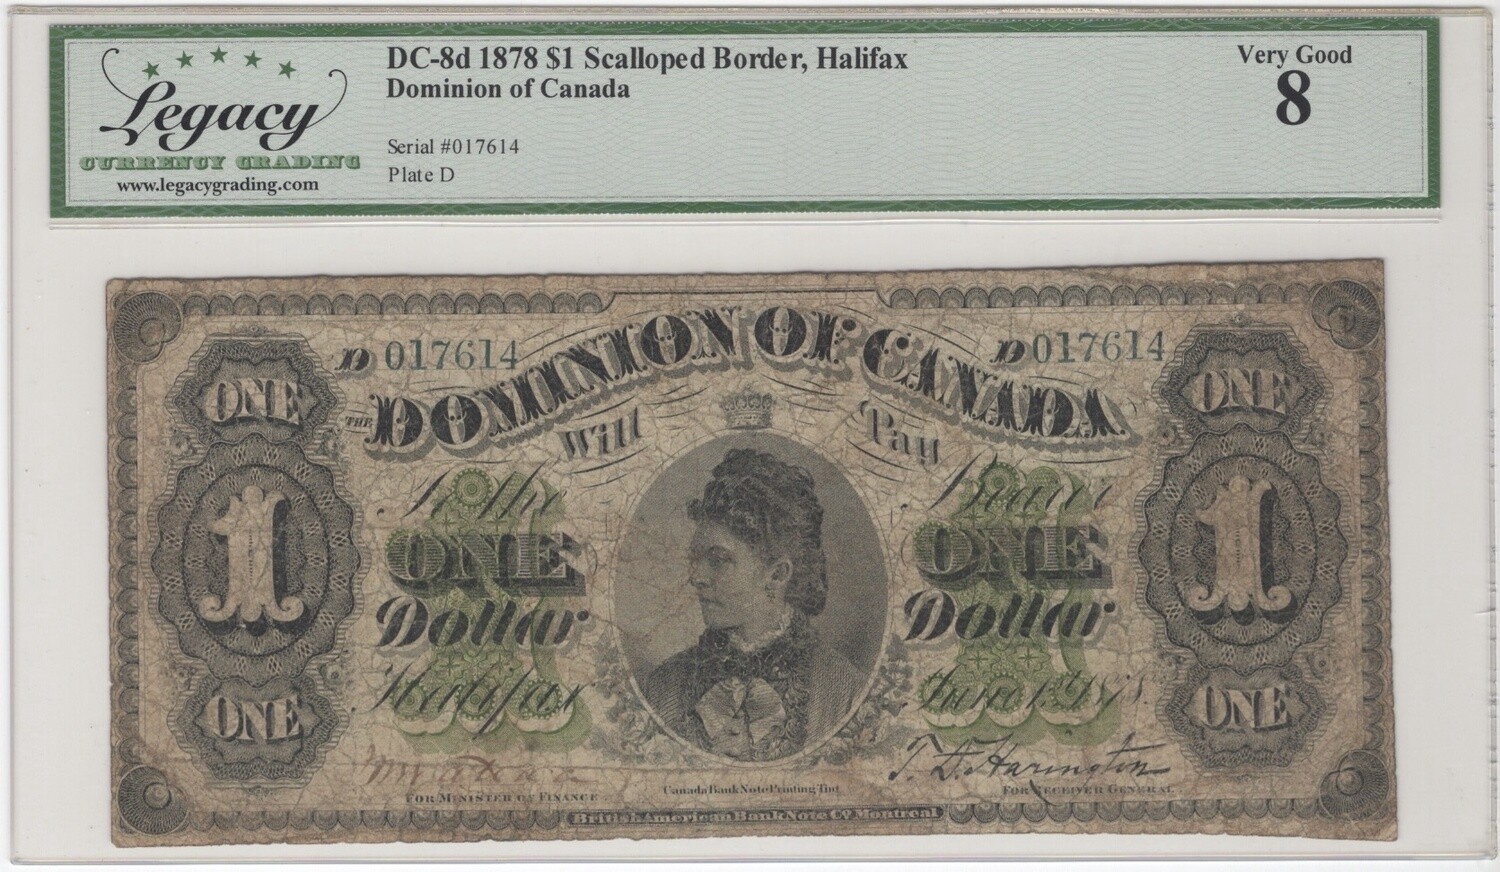 Dominion of Canada $1 Dollar Scalloped Border 1878 Halifax DC-8d Very Good Legacy 8 S/N017614/D